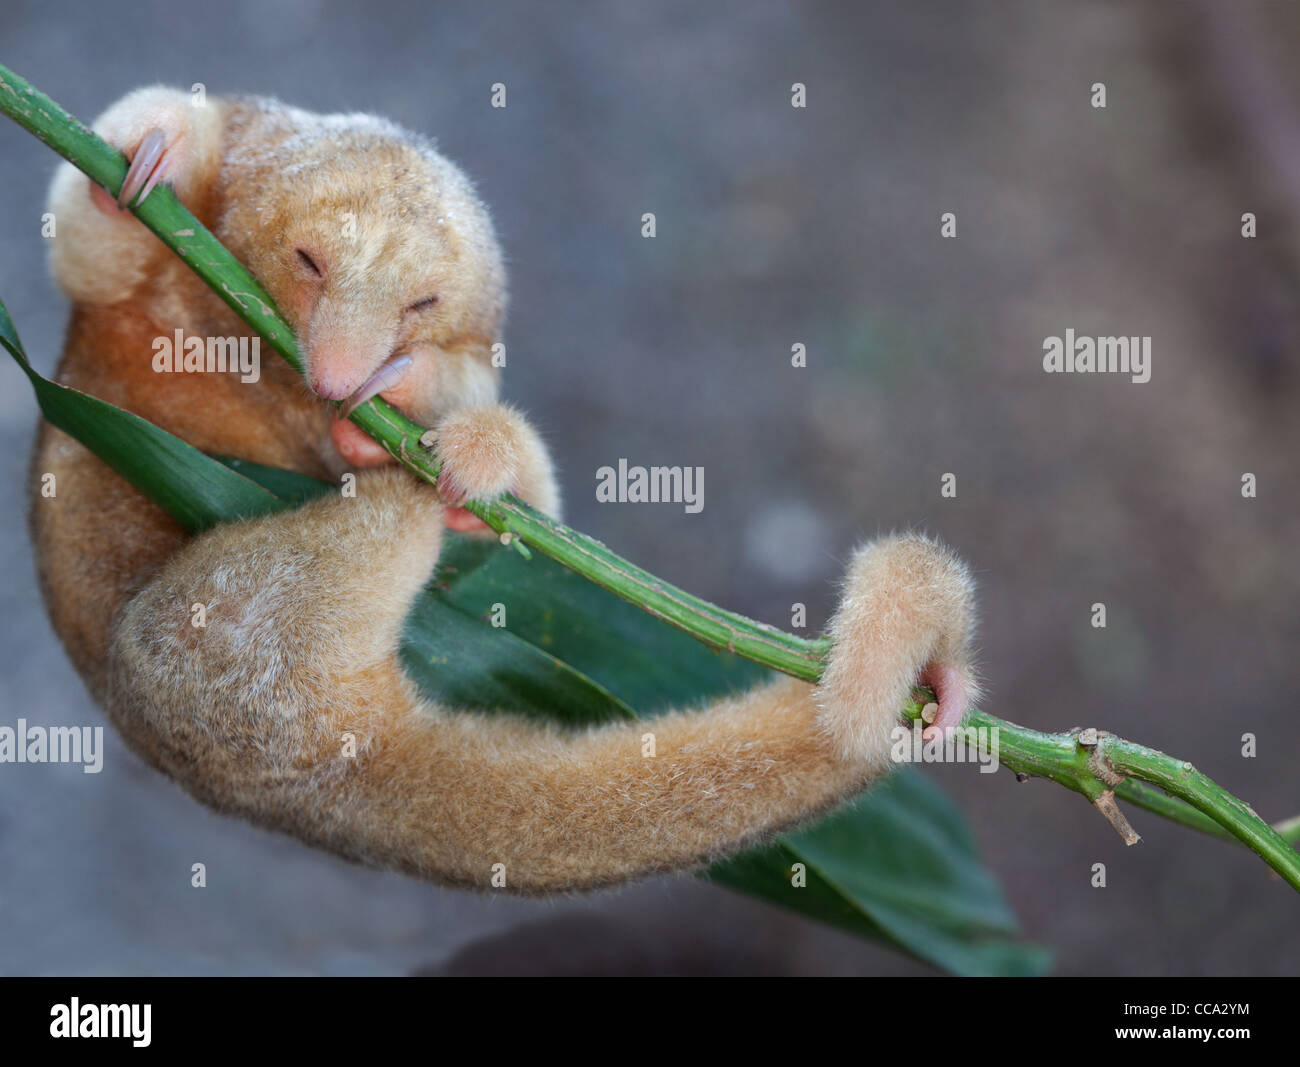 Panama wildlife with a silky anteater, Cyclopes didactylus, in a forest near Penonome in Cocle province, Republic of Panama, Central America. Stock Photo